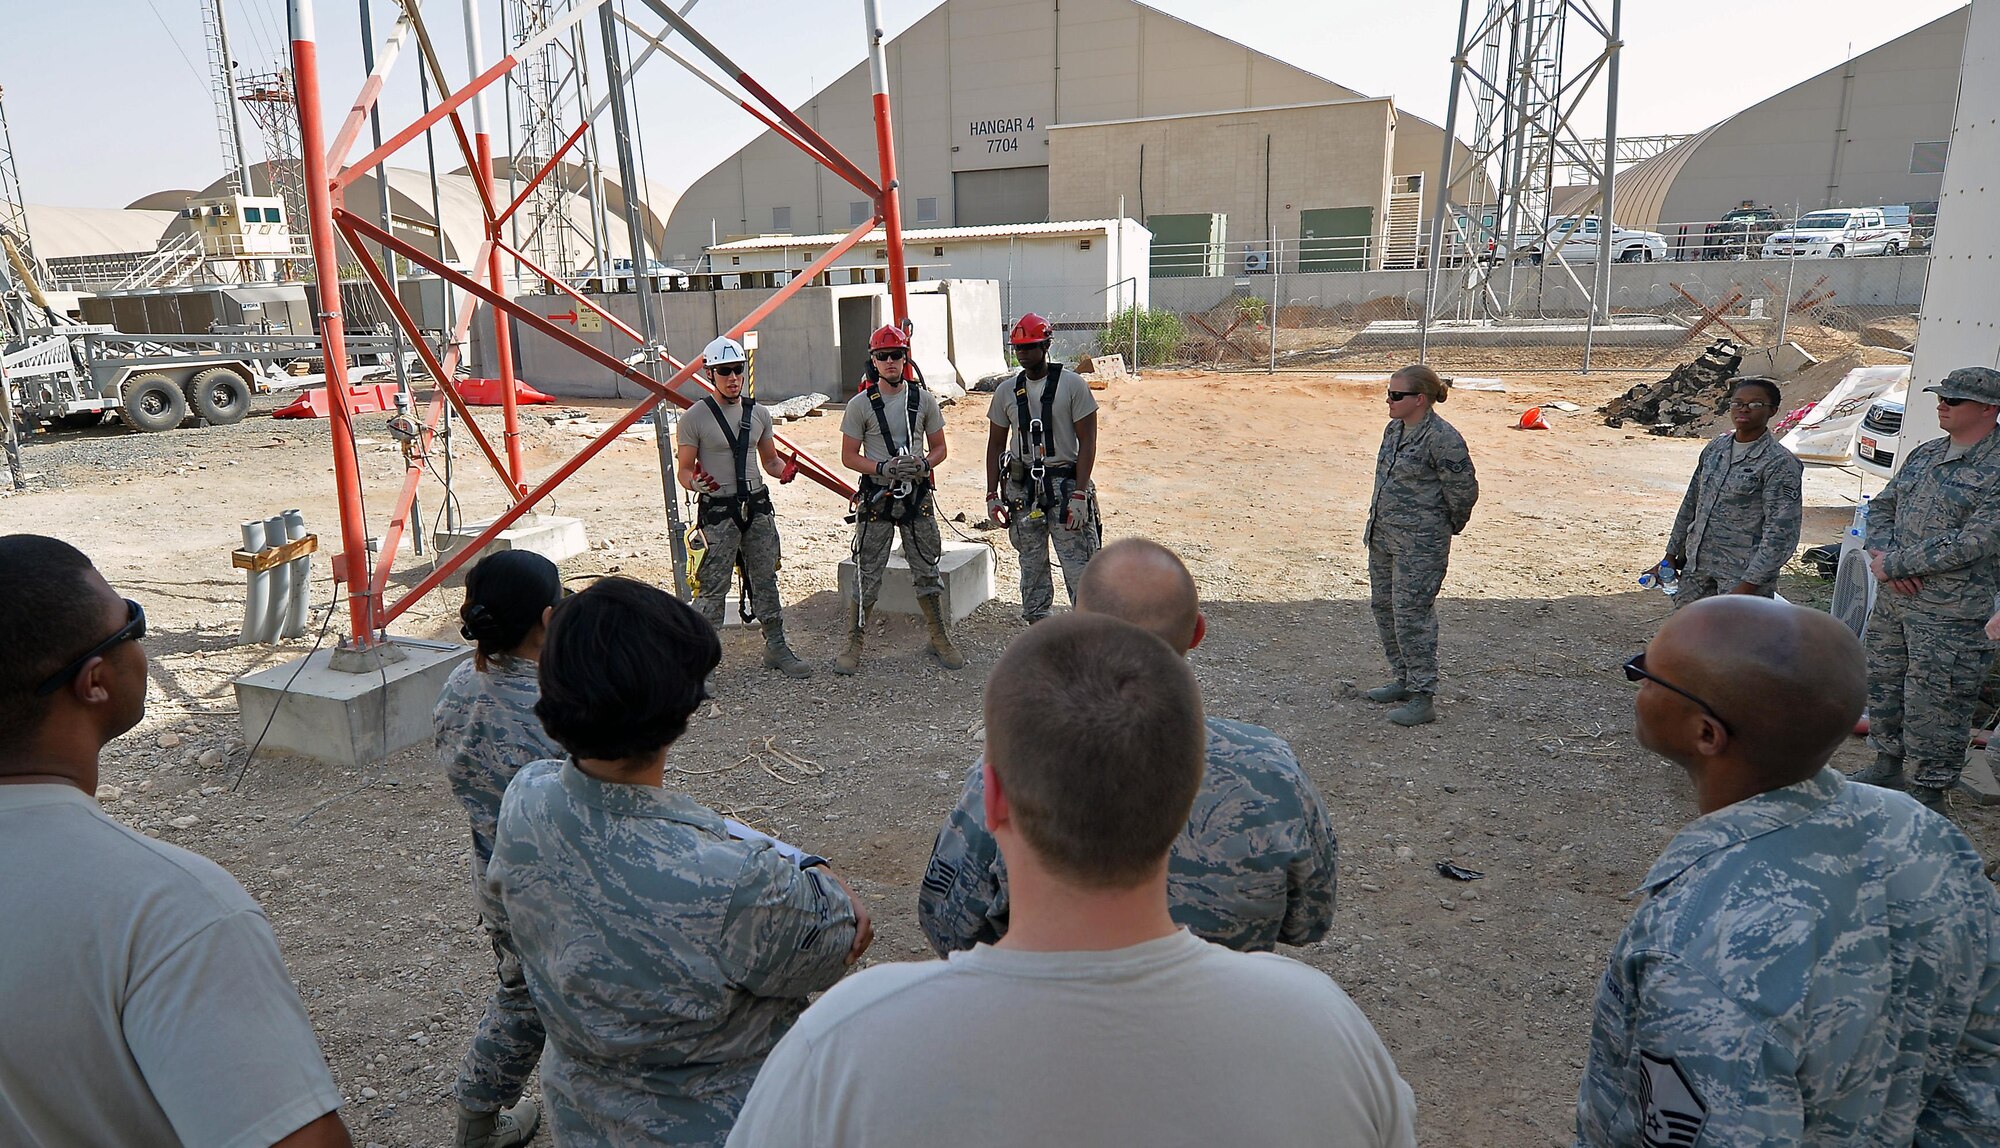 Staff Sgt. William, RF Transmissions craftsman, explains proper pre-climb procedures to base personnel in support of the Air Force fall protection focus initiative at an undisclosed location in Southwest Asia May 11, 2015. According to the Air Force Safety Center website, The Fall Protection Focus alerts the entire Air Force family - active duty, civilian, Guard, Reserve and family members - of what can be done to prevent fall-related injuries and deaths. (U.S. Air Force photo/Tech. Sgt. Jeff Andrejcik)